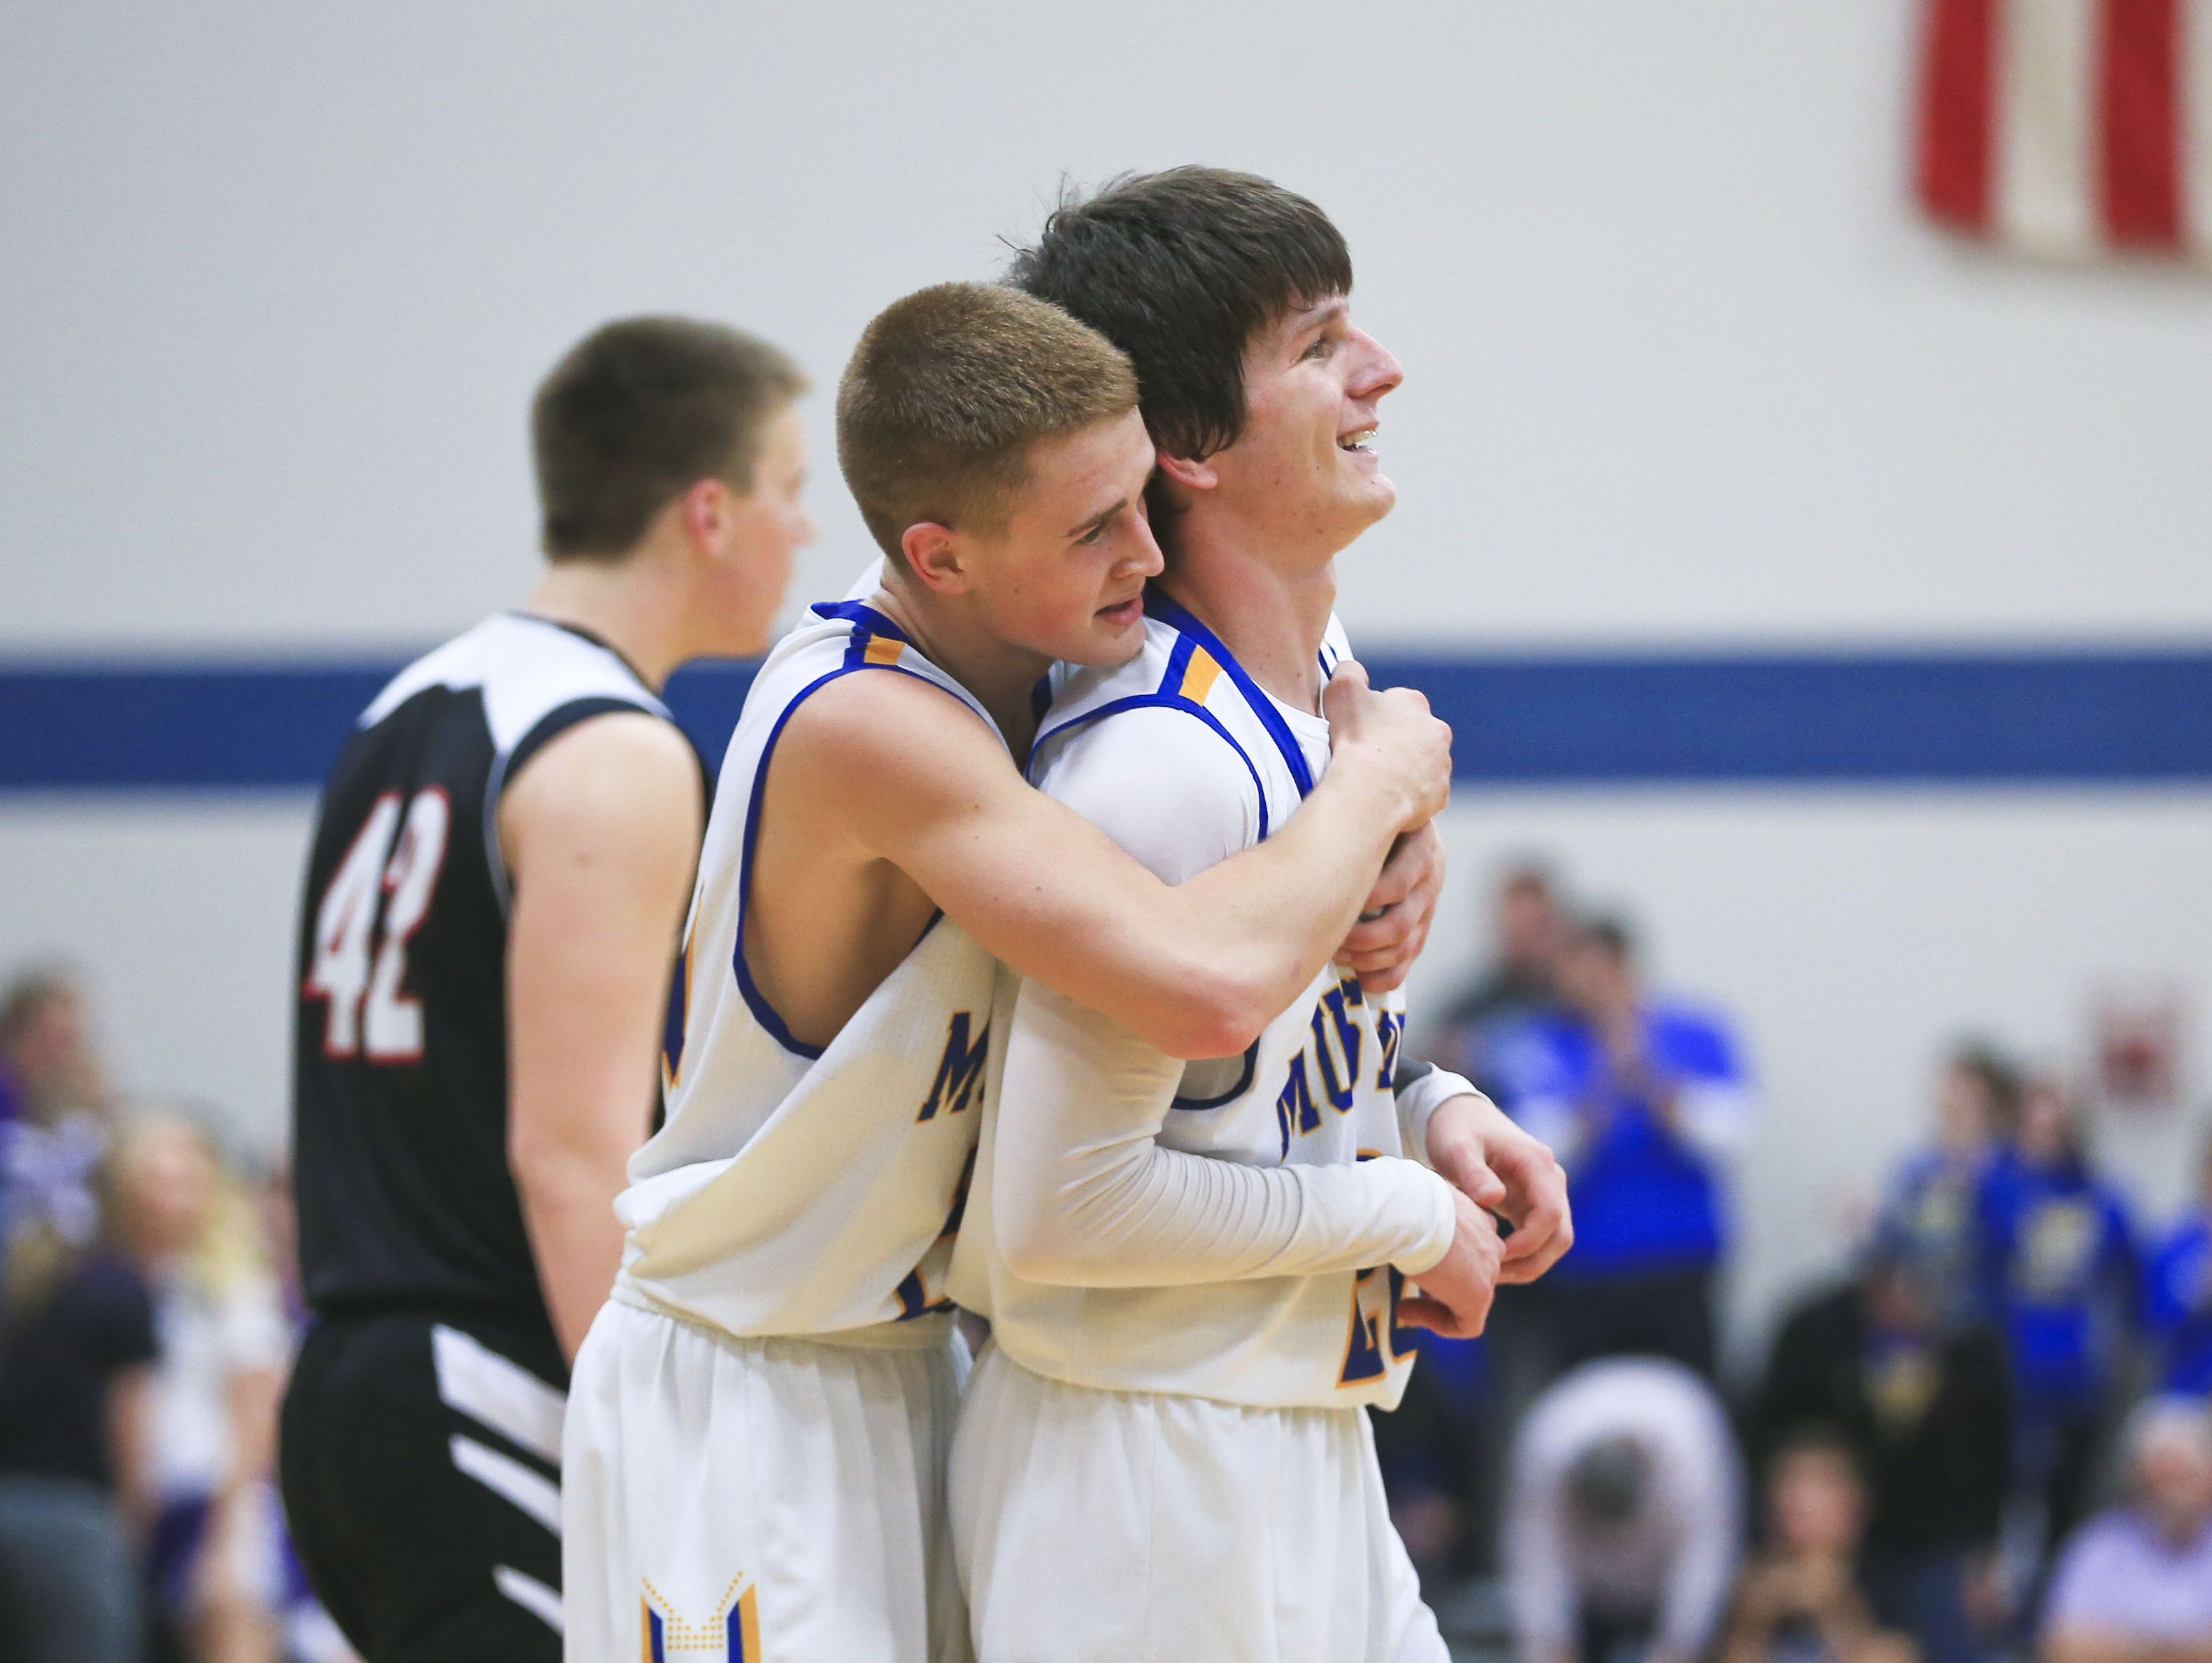 New Washington's Hunter Lind, left, congratulates teammate Brandon Horton for his late three-point score to help send the game into overtime at the Class A Semifinal Sectional at New Washington High School last season.